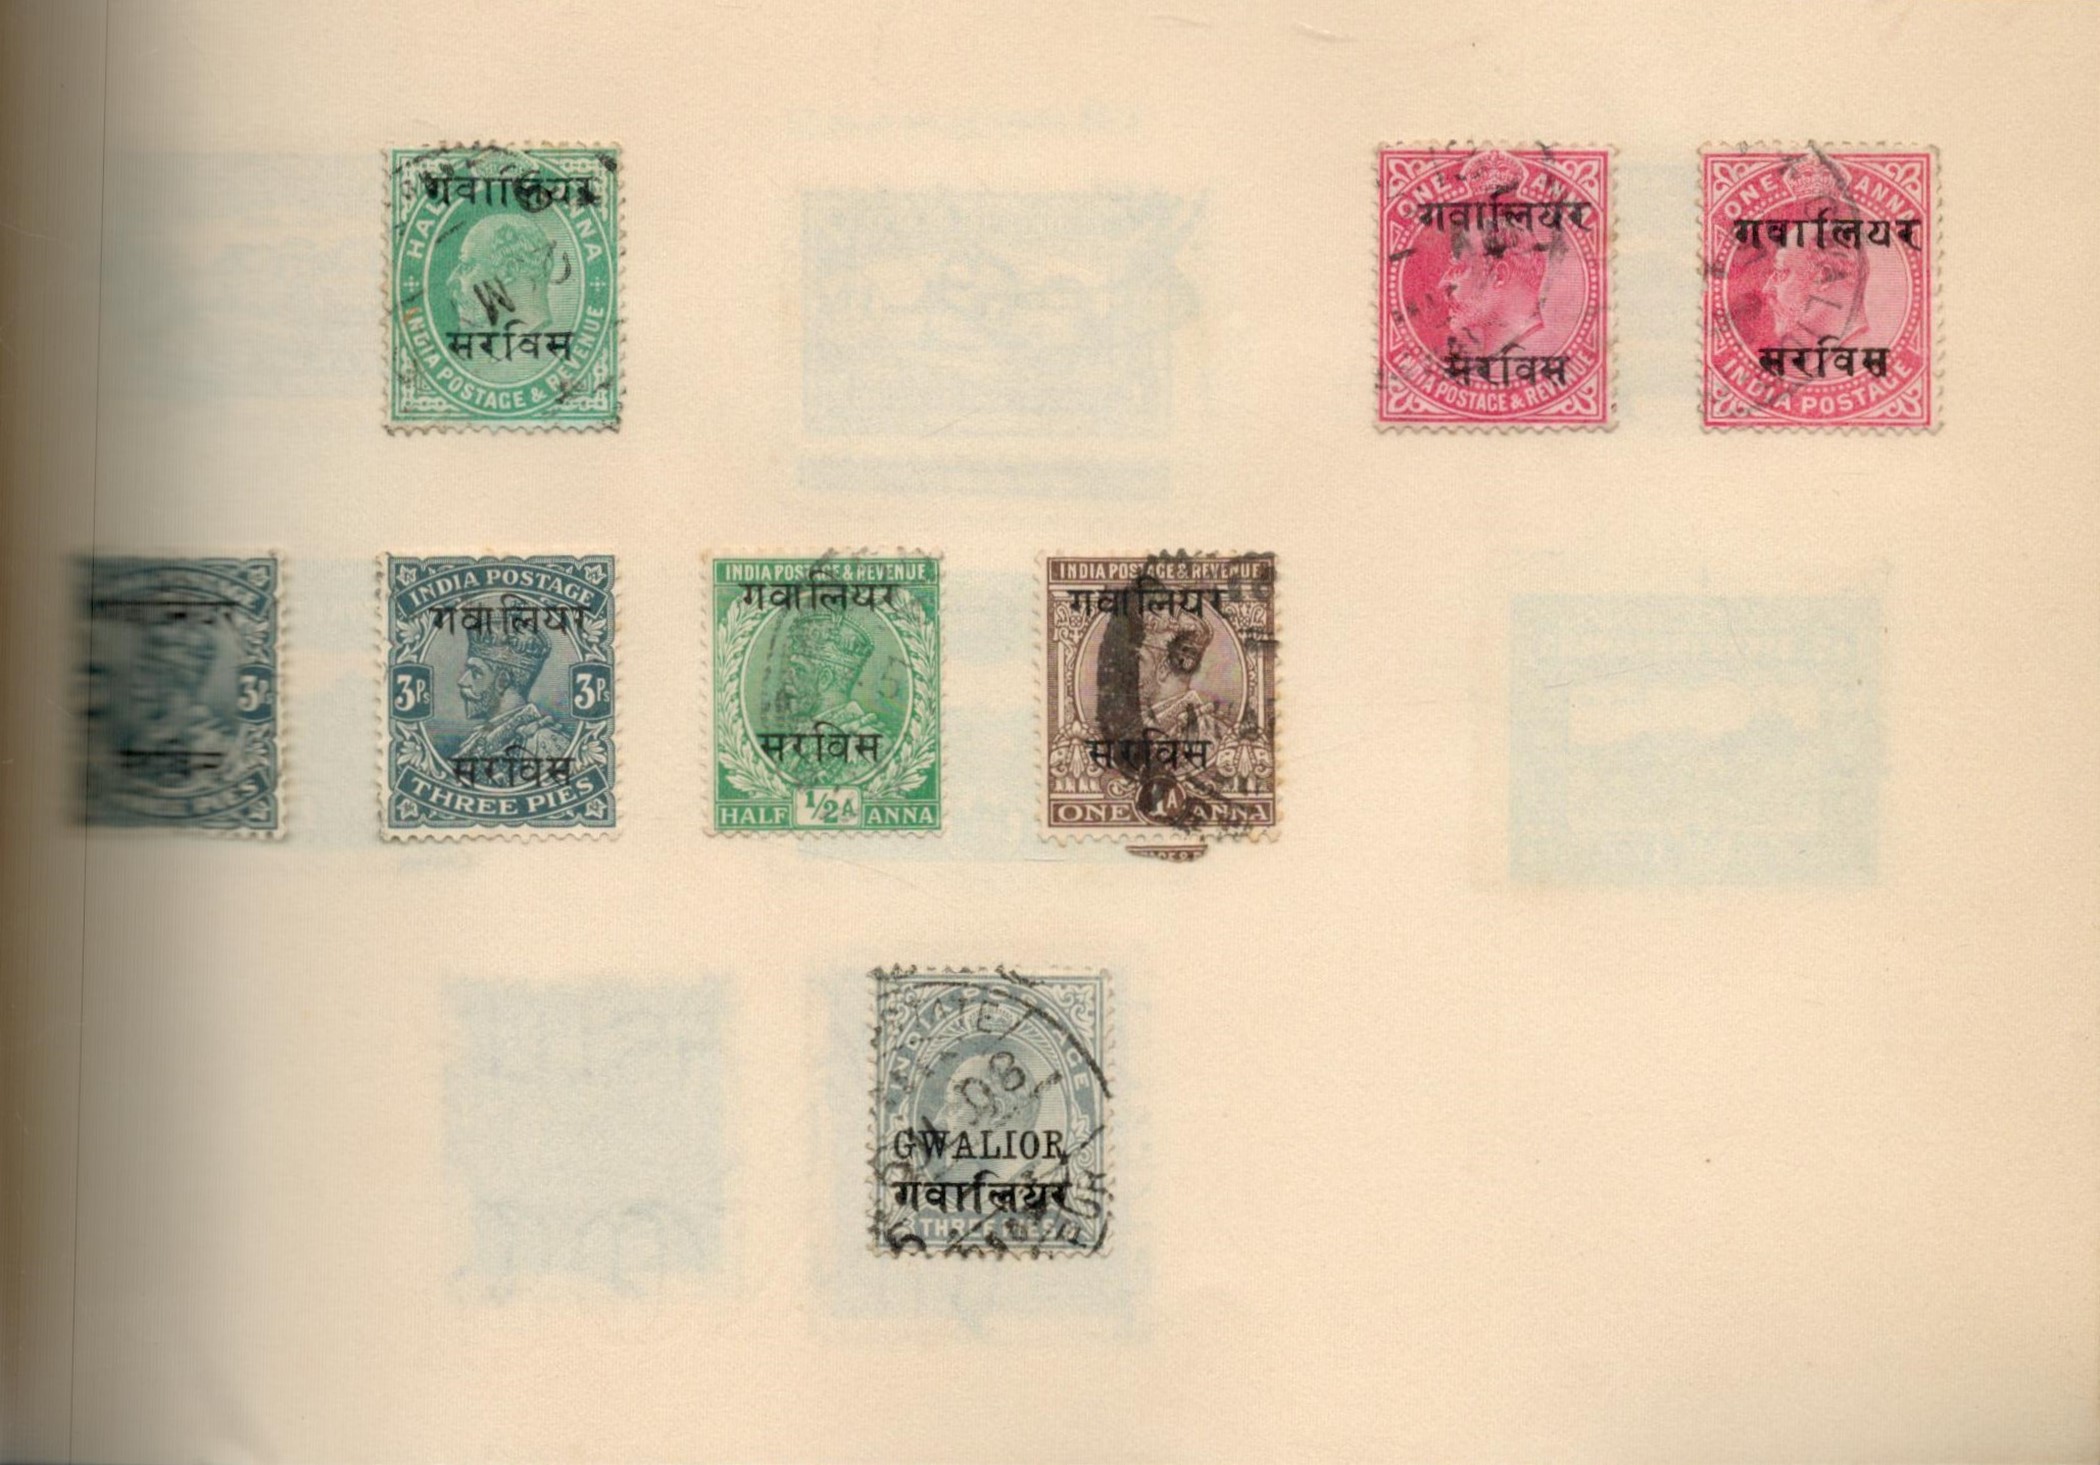 Worldwide Stamps in a Twinlock Crown Loose Leaf Binder countries include India, Iraq, Ireland, - Image 3 of 4